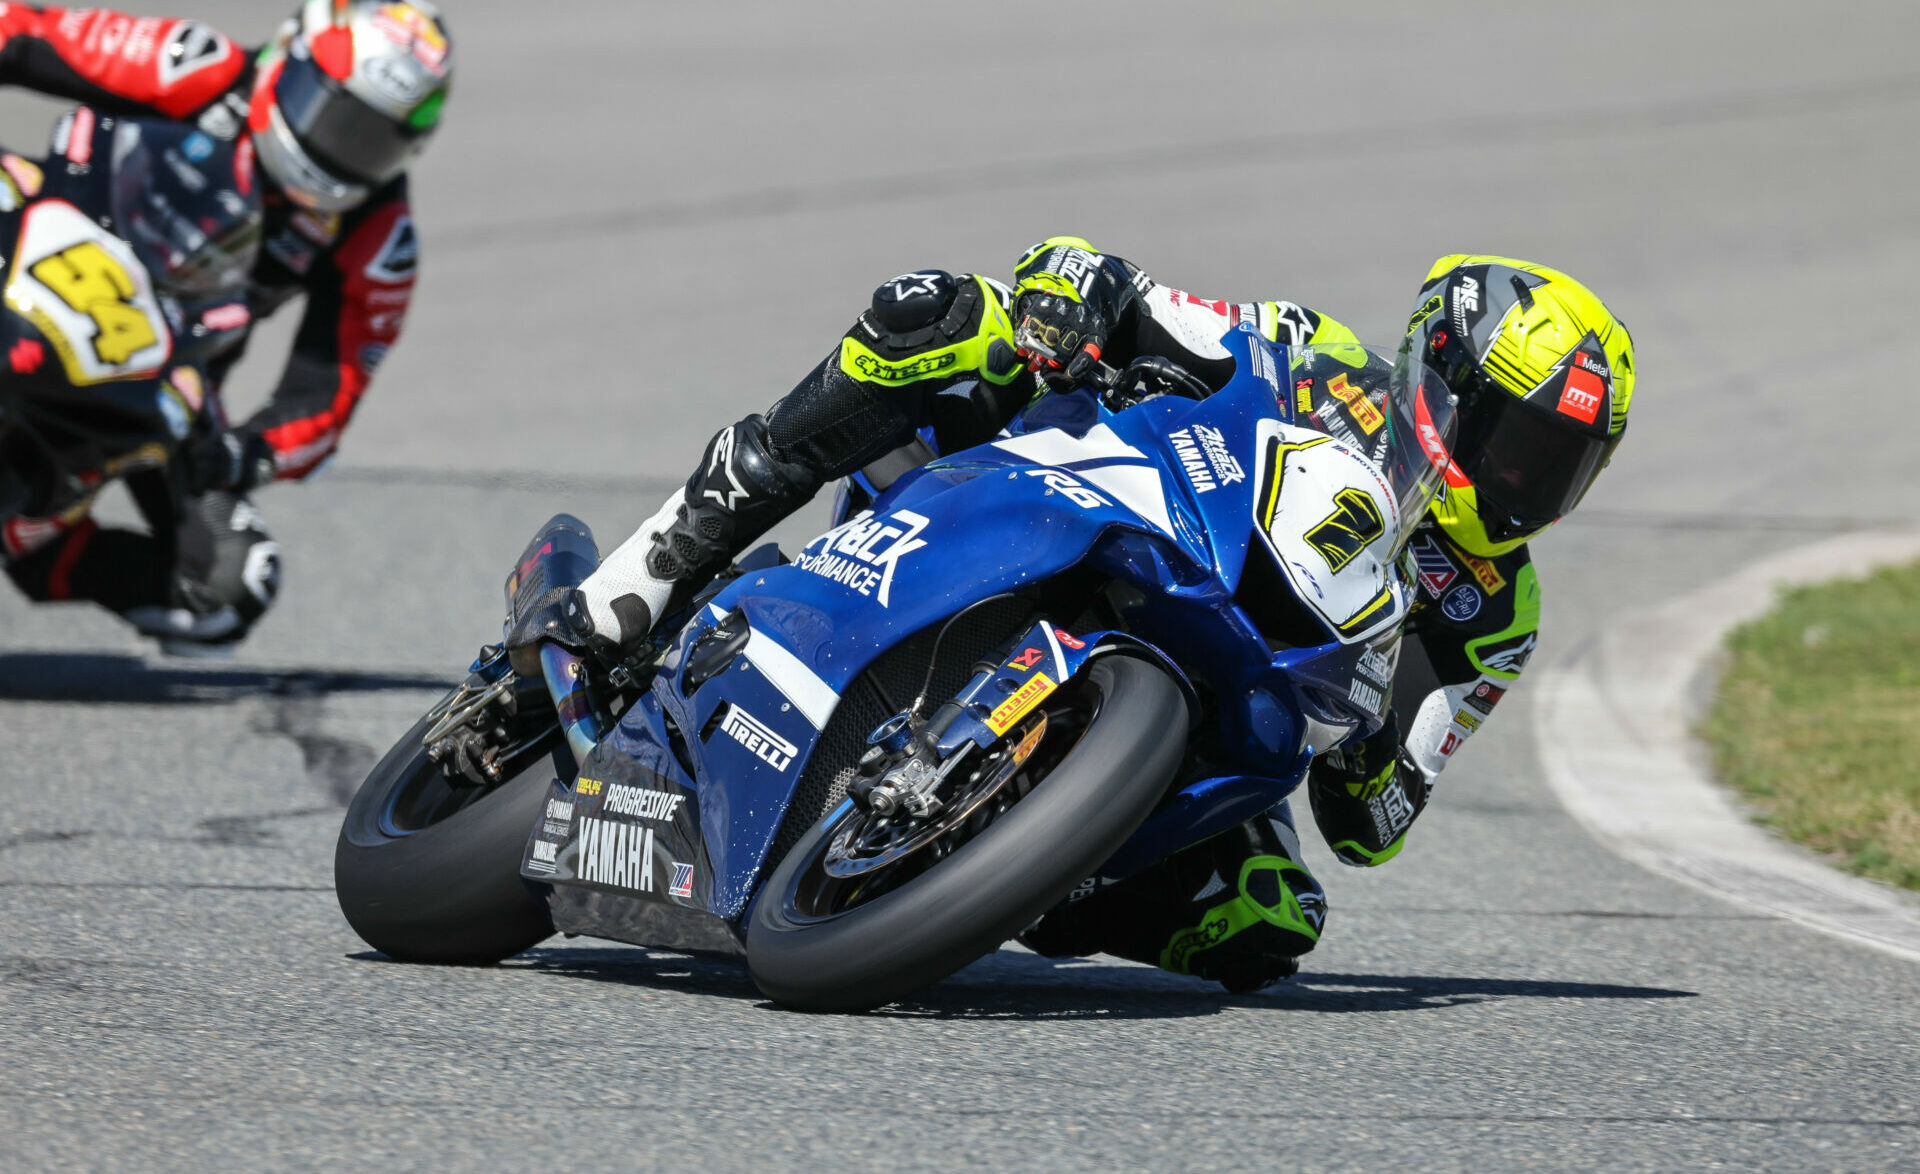 Xavi Fores (1) and Richie Escalante (54) as seen Thursday at Daytona International Speedway. Photo by Brian J. Nelson.